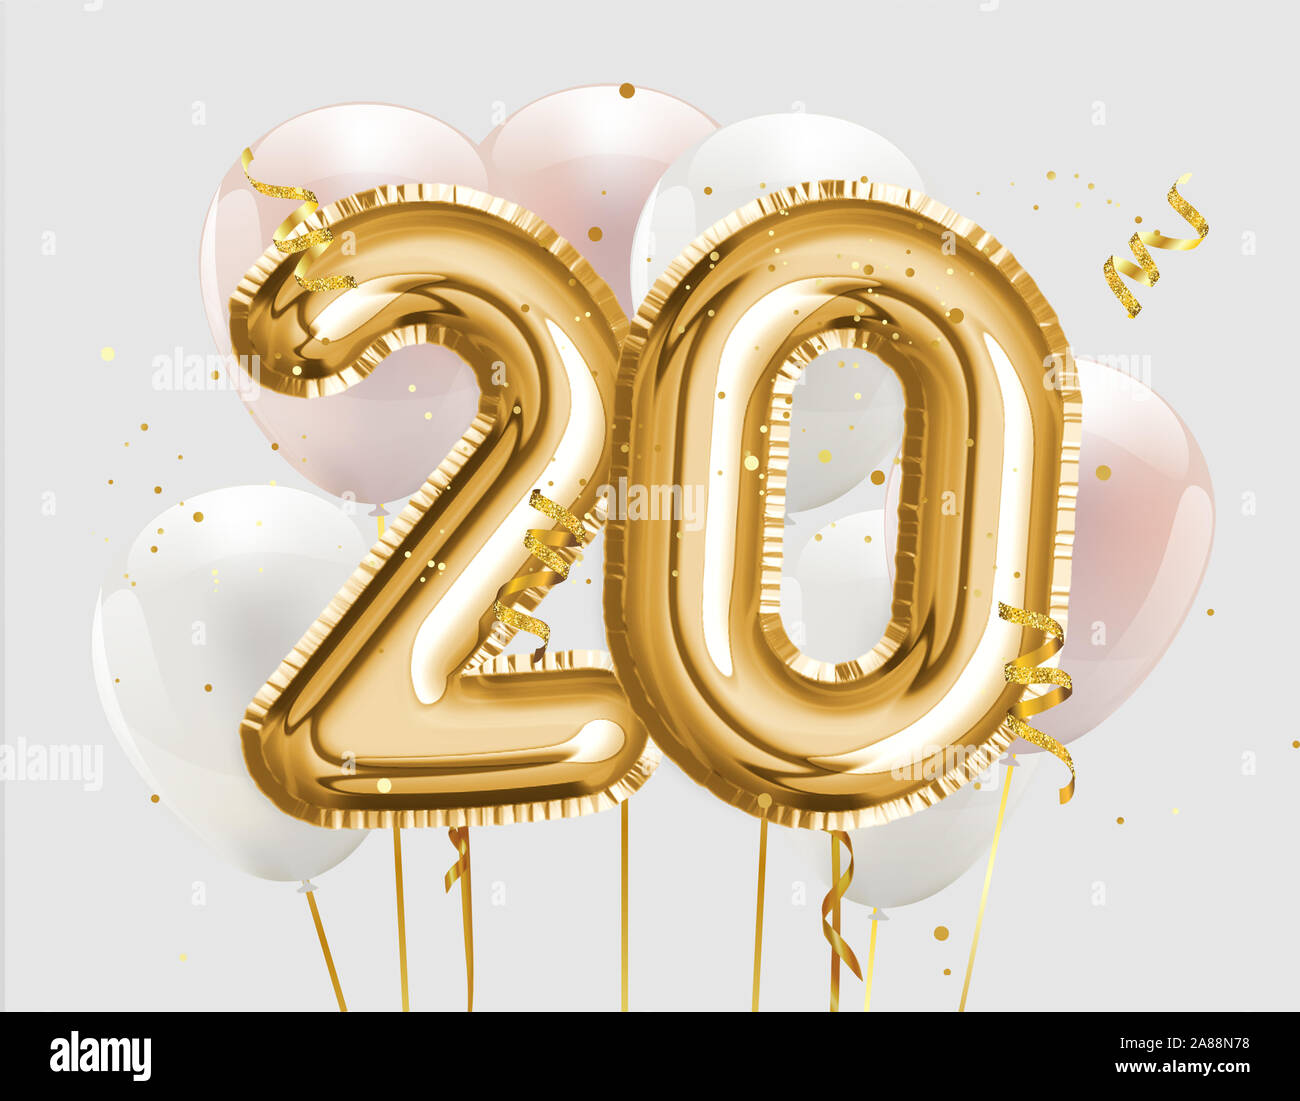 Happy 20th birthday gold foil balloon greeting background. 20 years anniversary logo template- 20th celebrating with confetti. Photo stock. Stock Photo